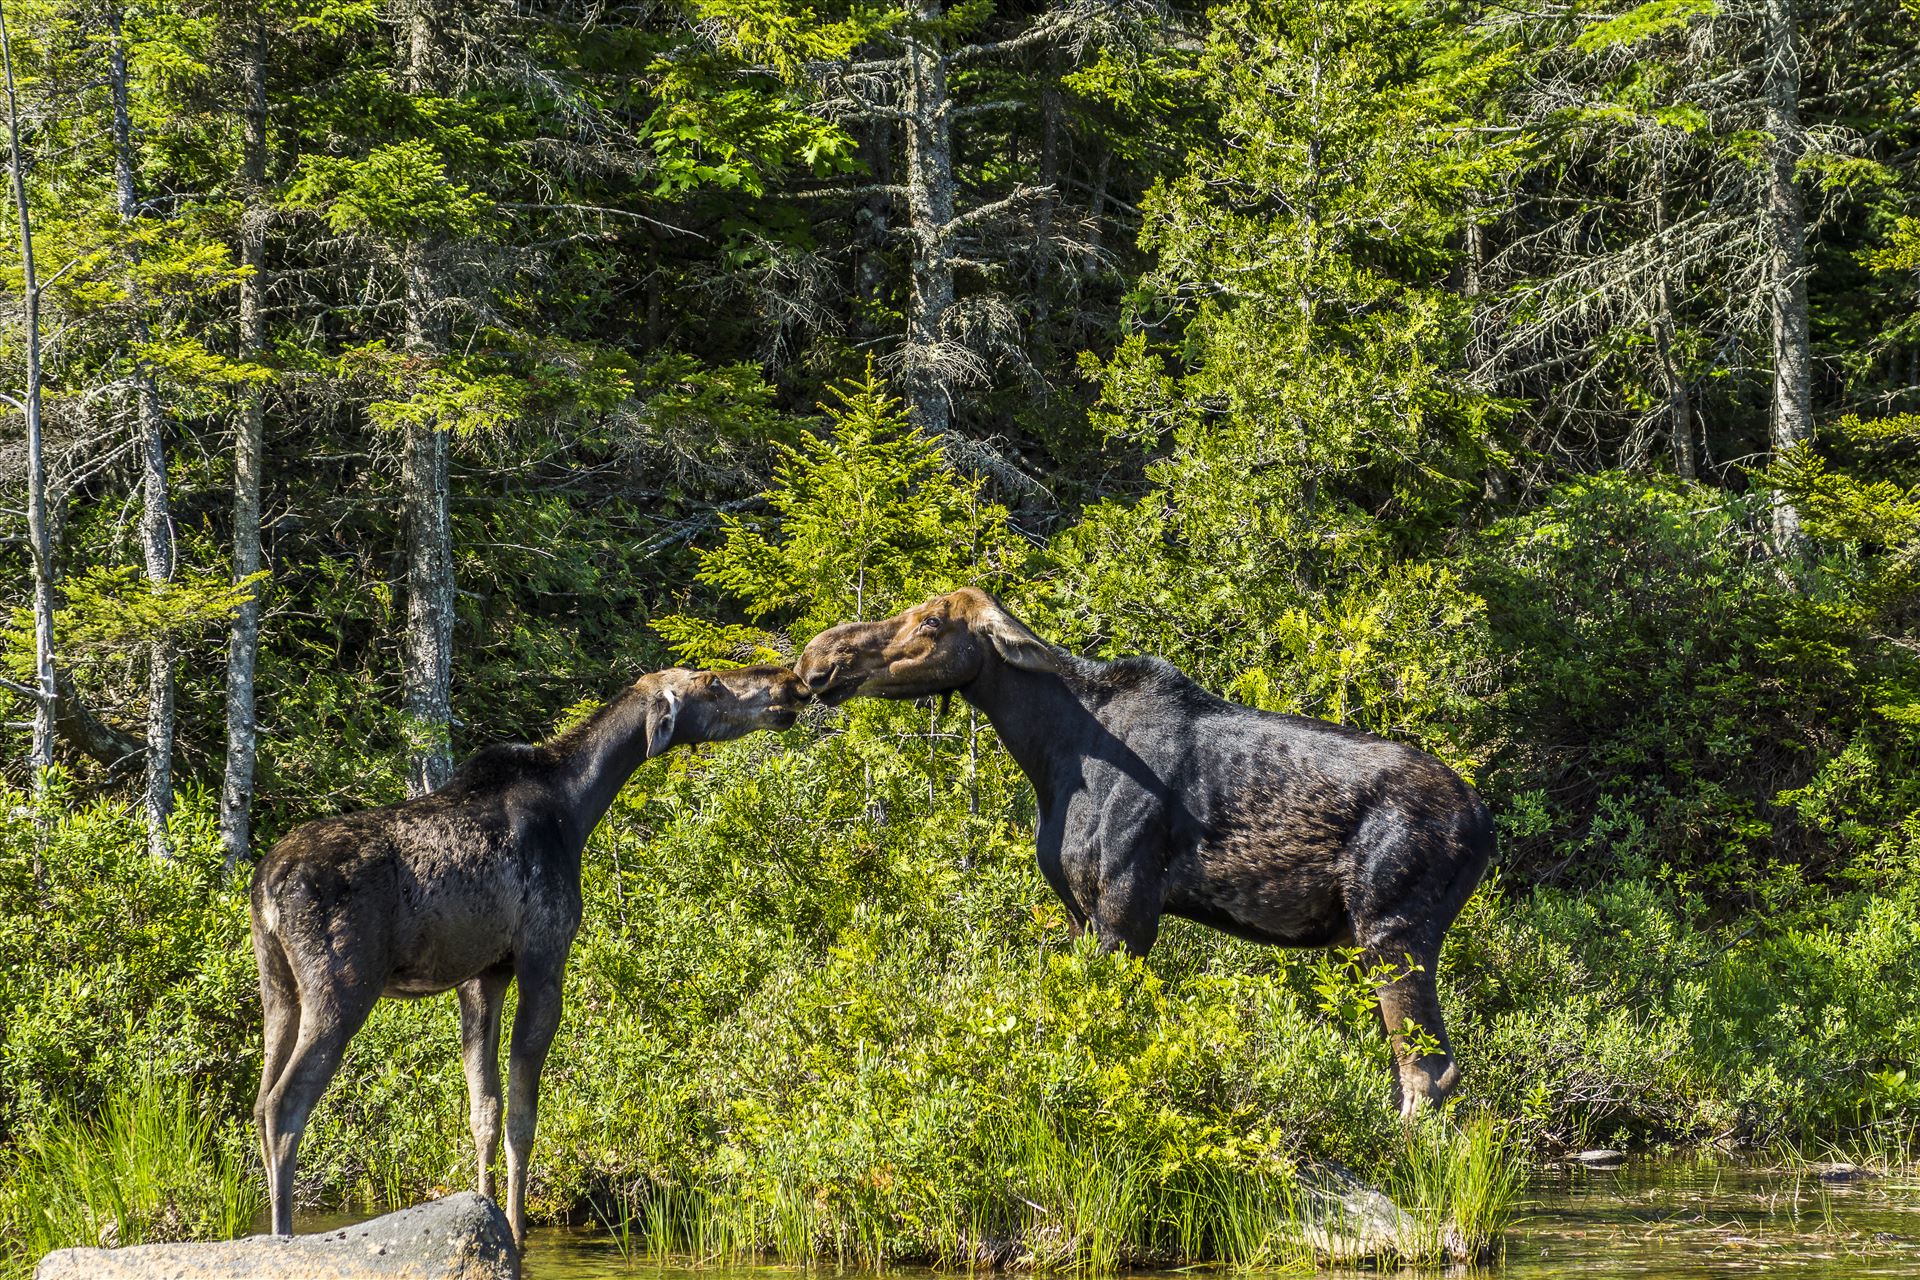 The Moose Kiss By the looks of their ears I don't think this is a memorable kiss by Buckmaster